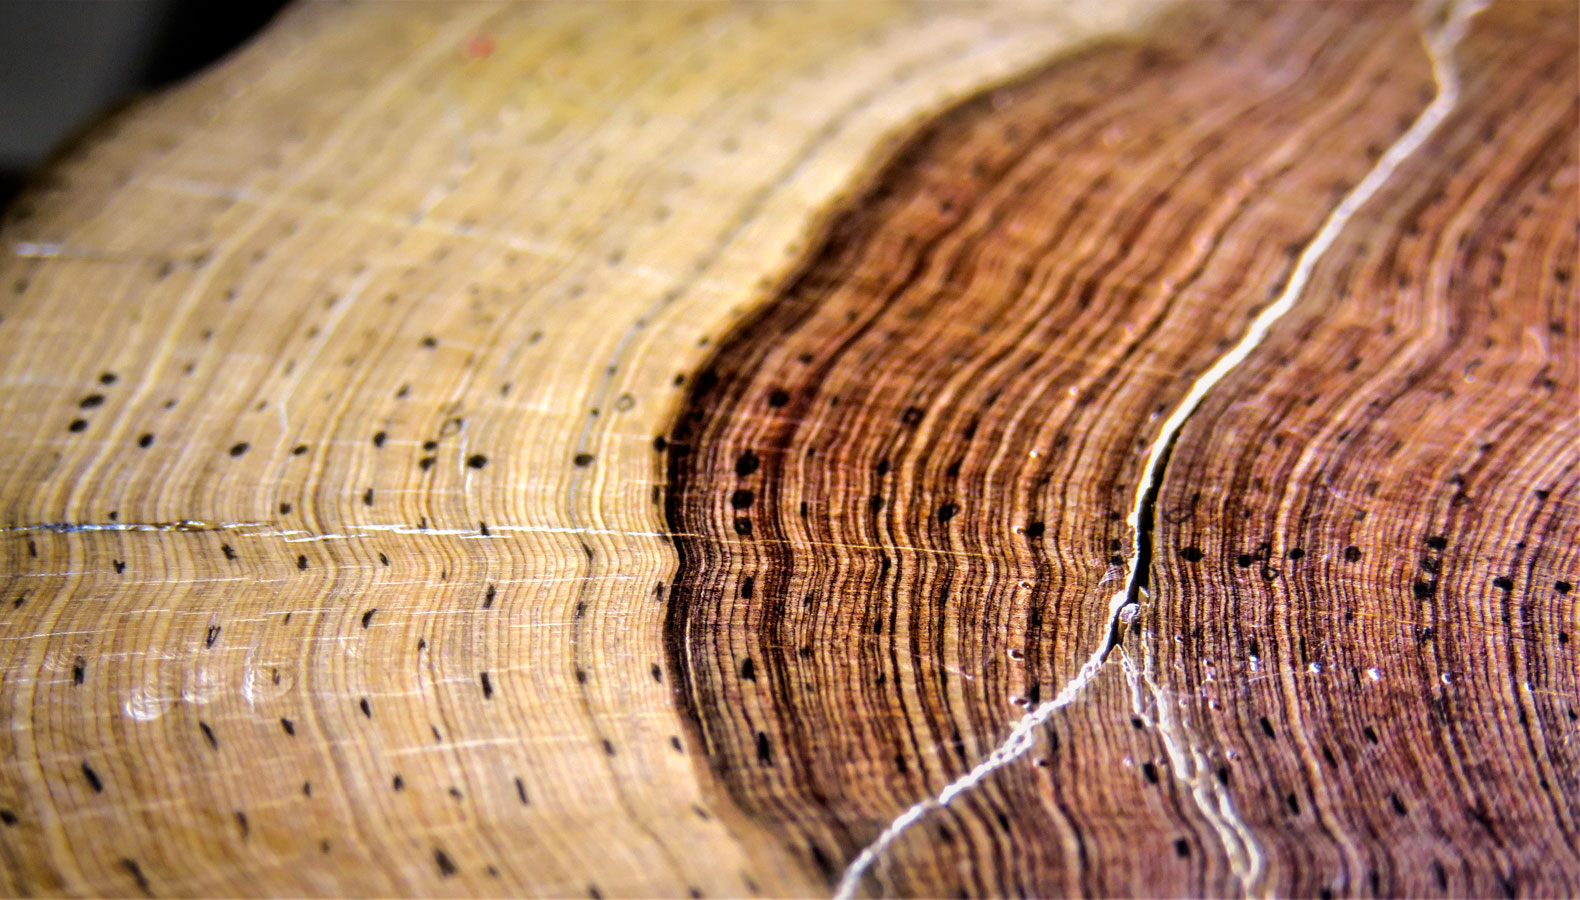 A section of a tree stump showing the rings.